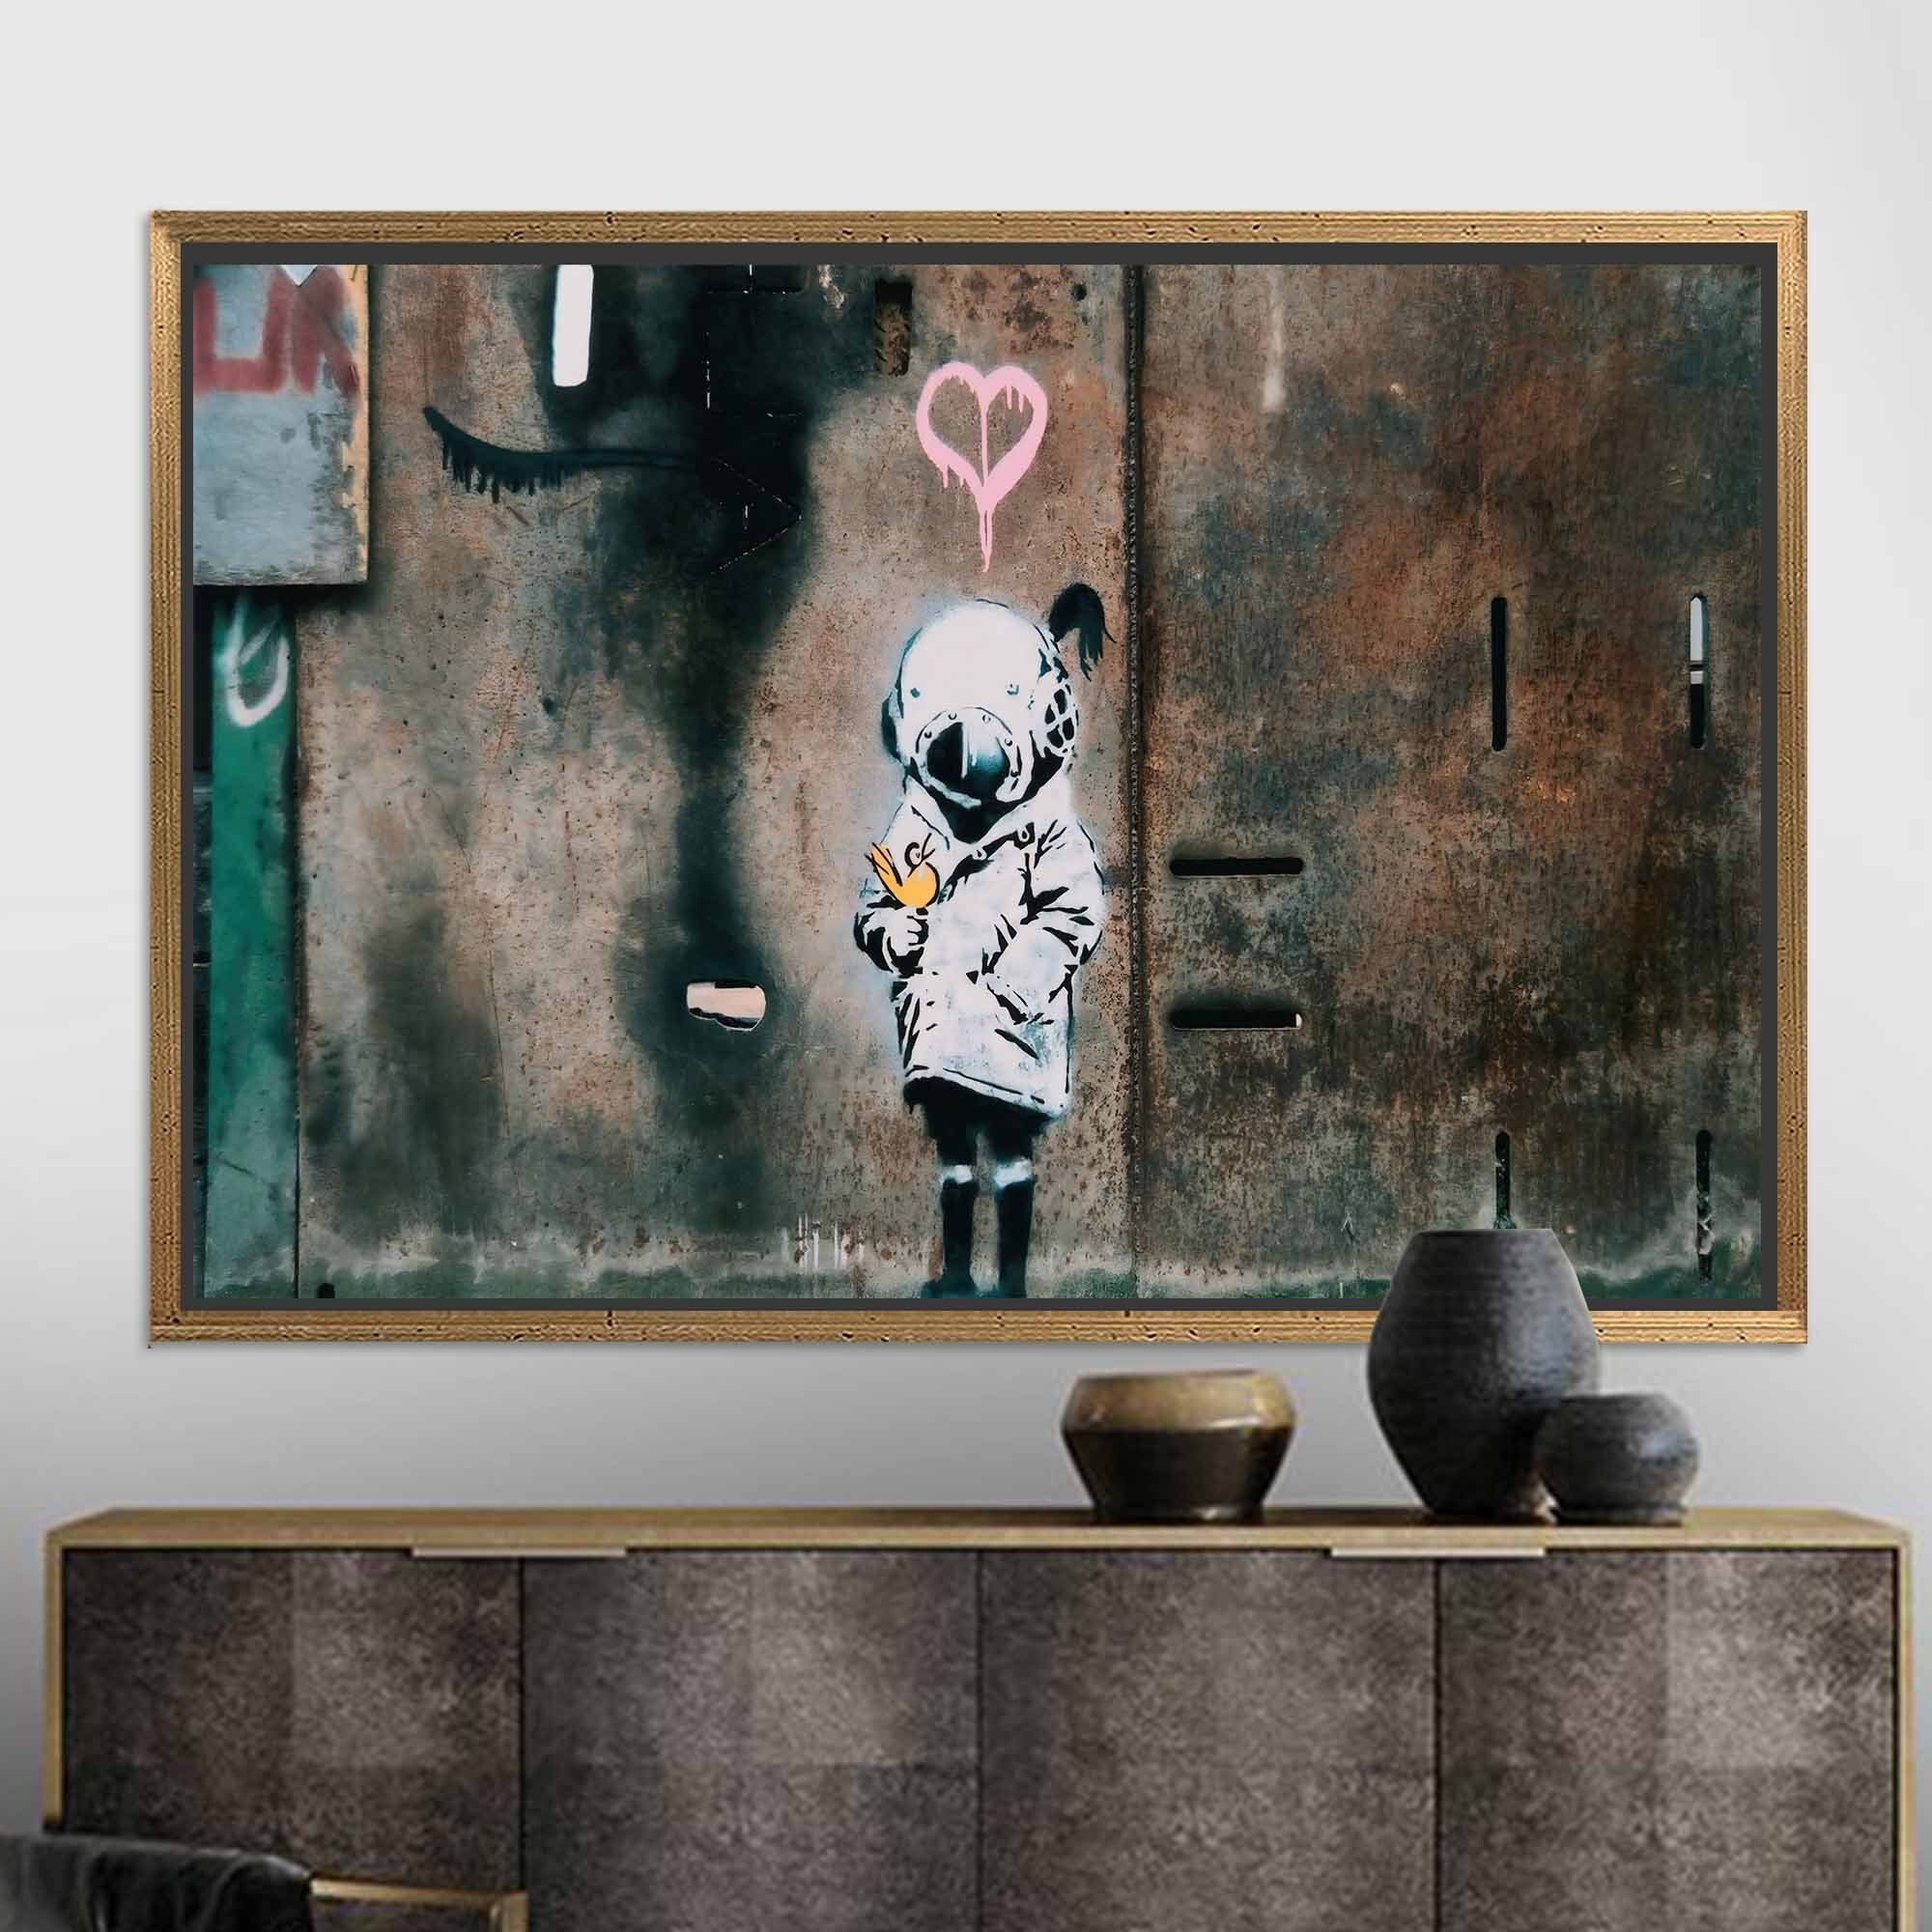  Banksy Canvas Wall Art Banksy Poster Large Size Picture Prints  for Living Room Bedroom Kitchen and Office Wall Decor Frameless (65x130 cm)  26×52 inch: Posters & Prints